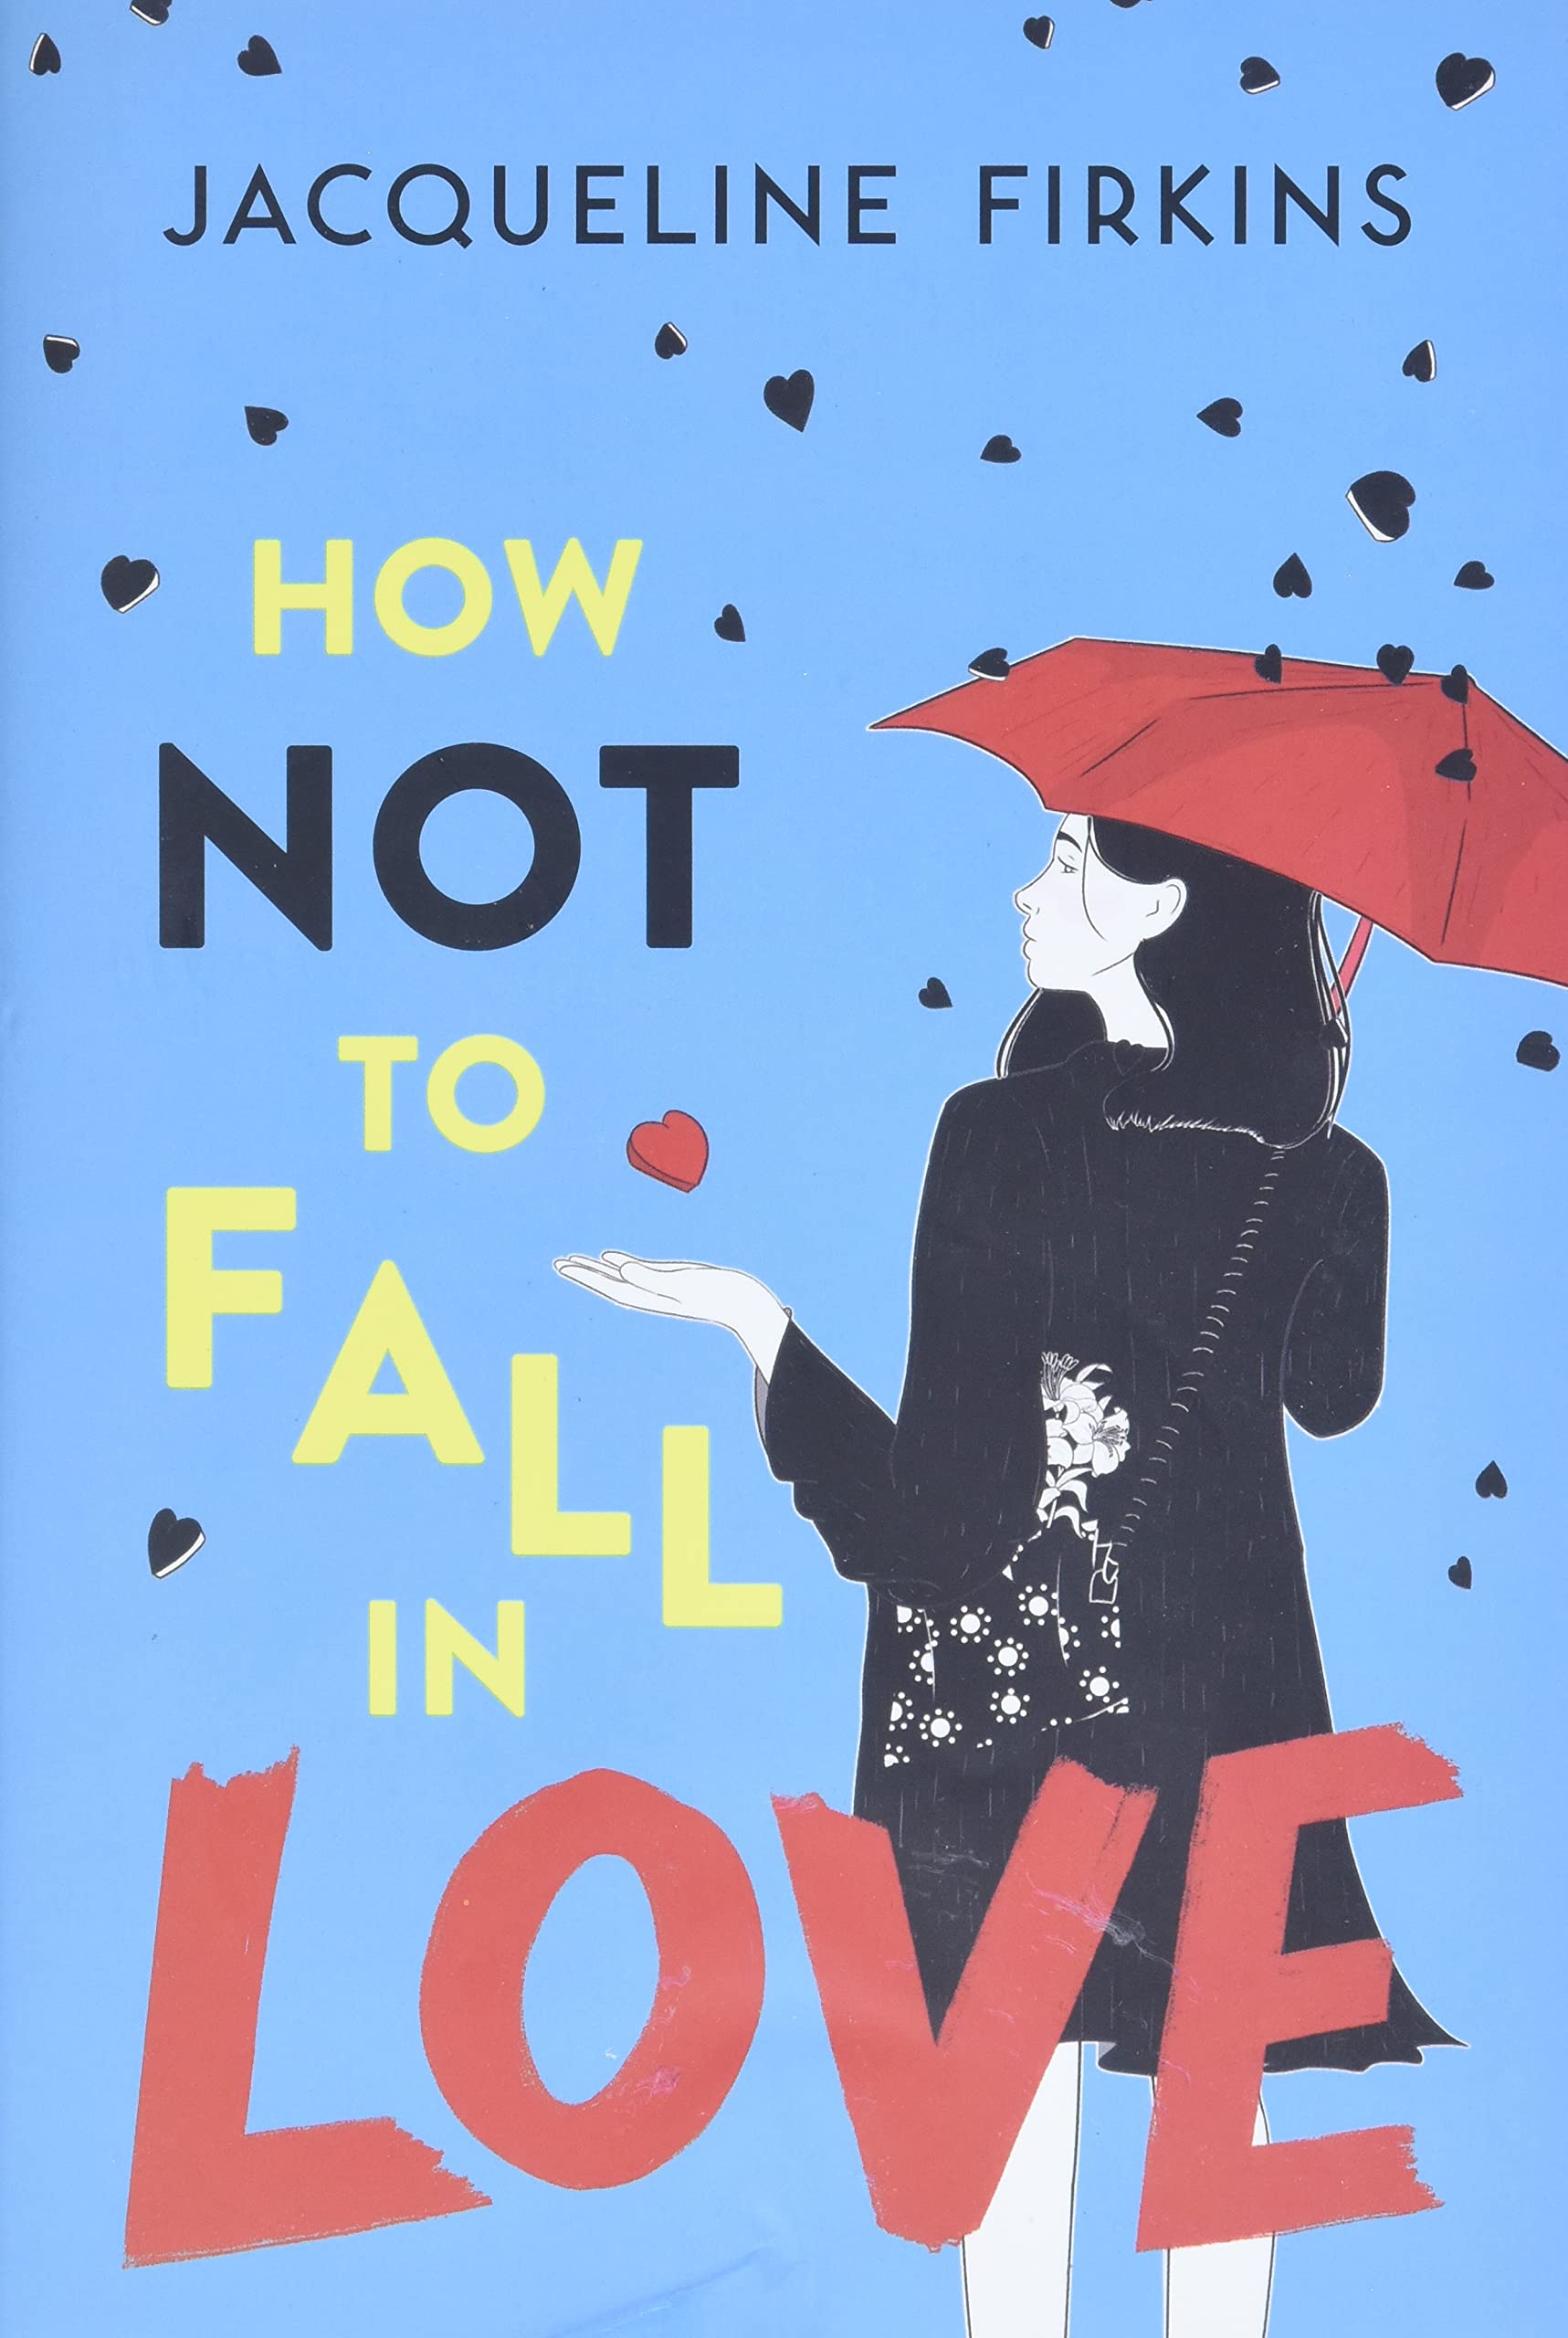 Cover of “How Not to Fall in Love” by Jacqueline Firkins